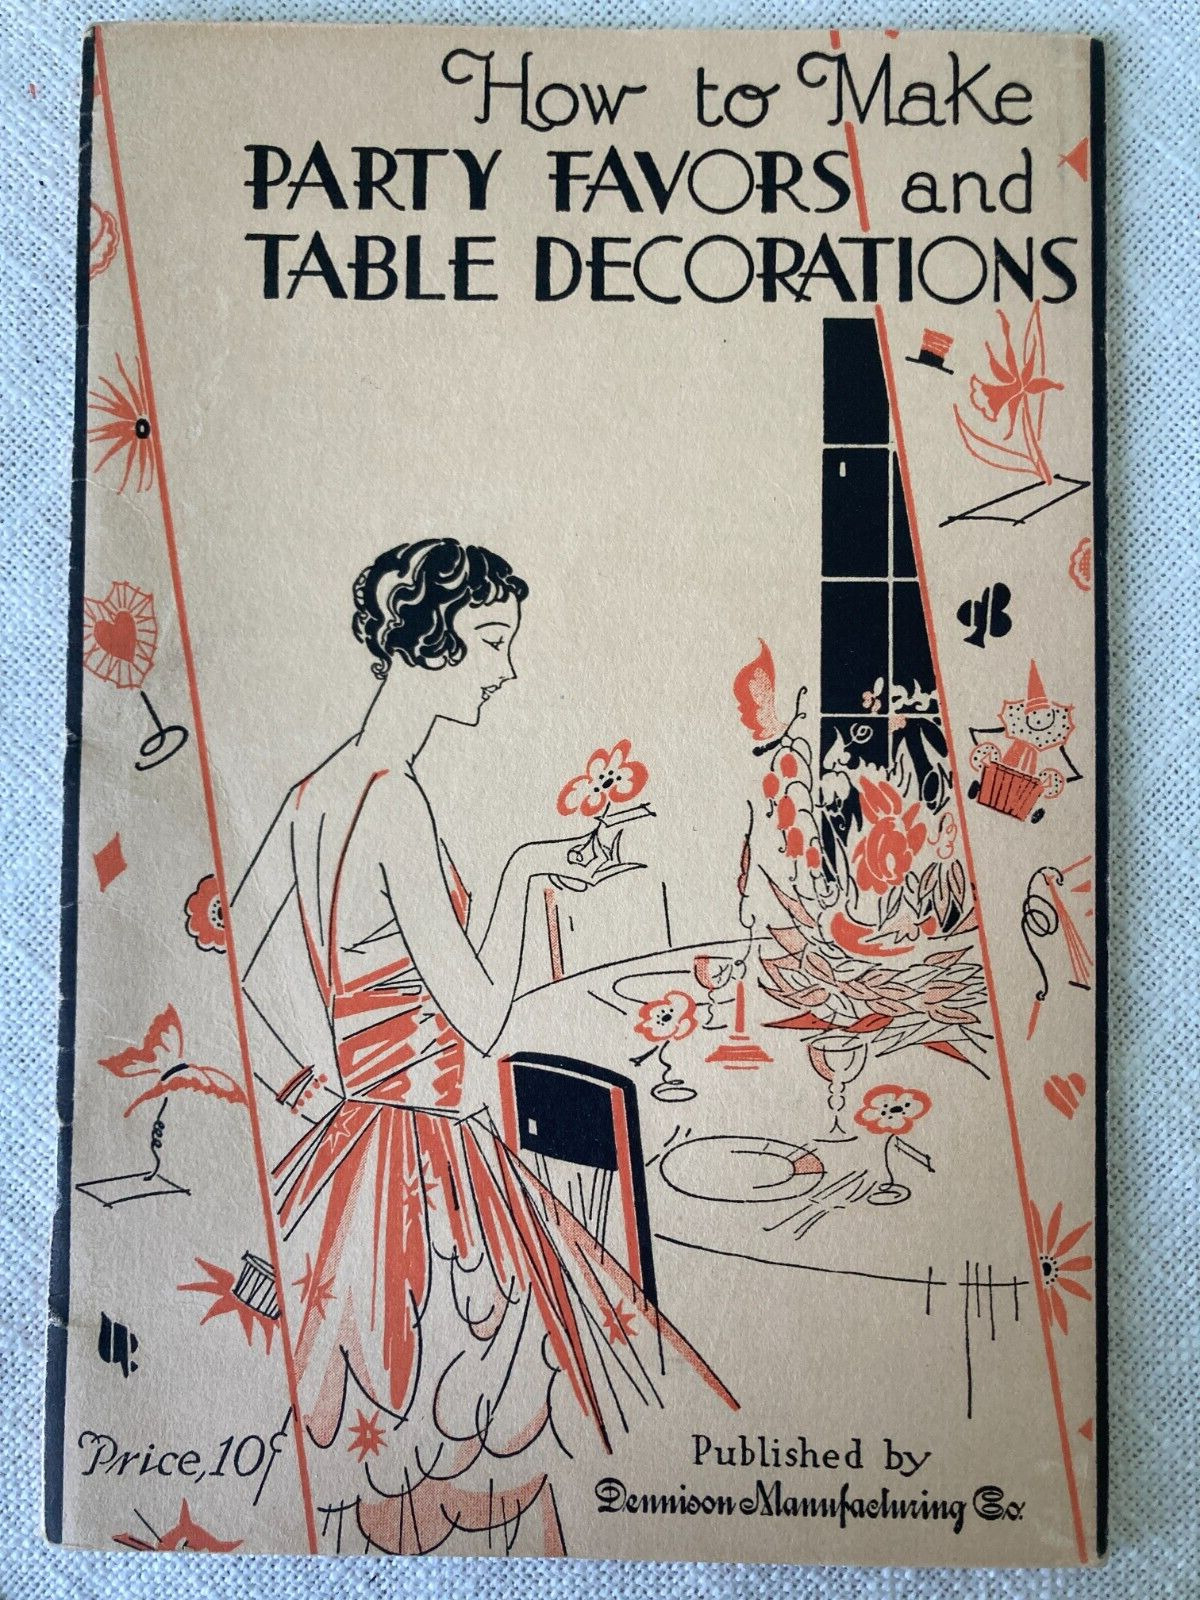 1928 Bklt How To Make Party Favors And Table Decorations / Dennison Mfg